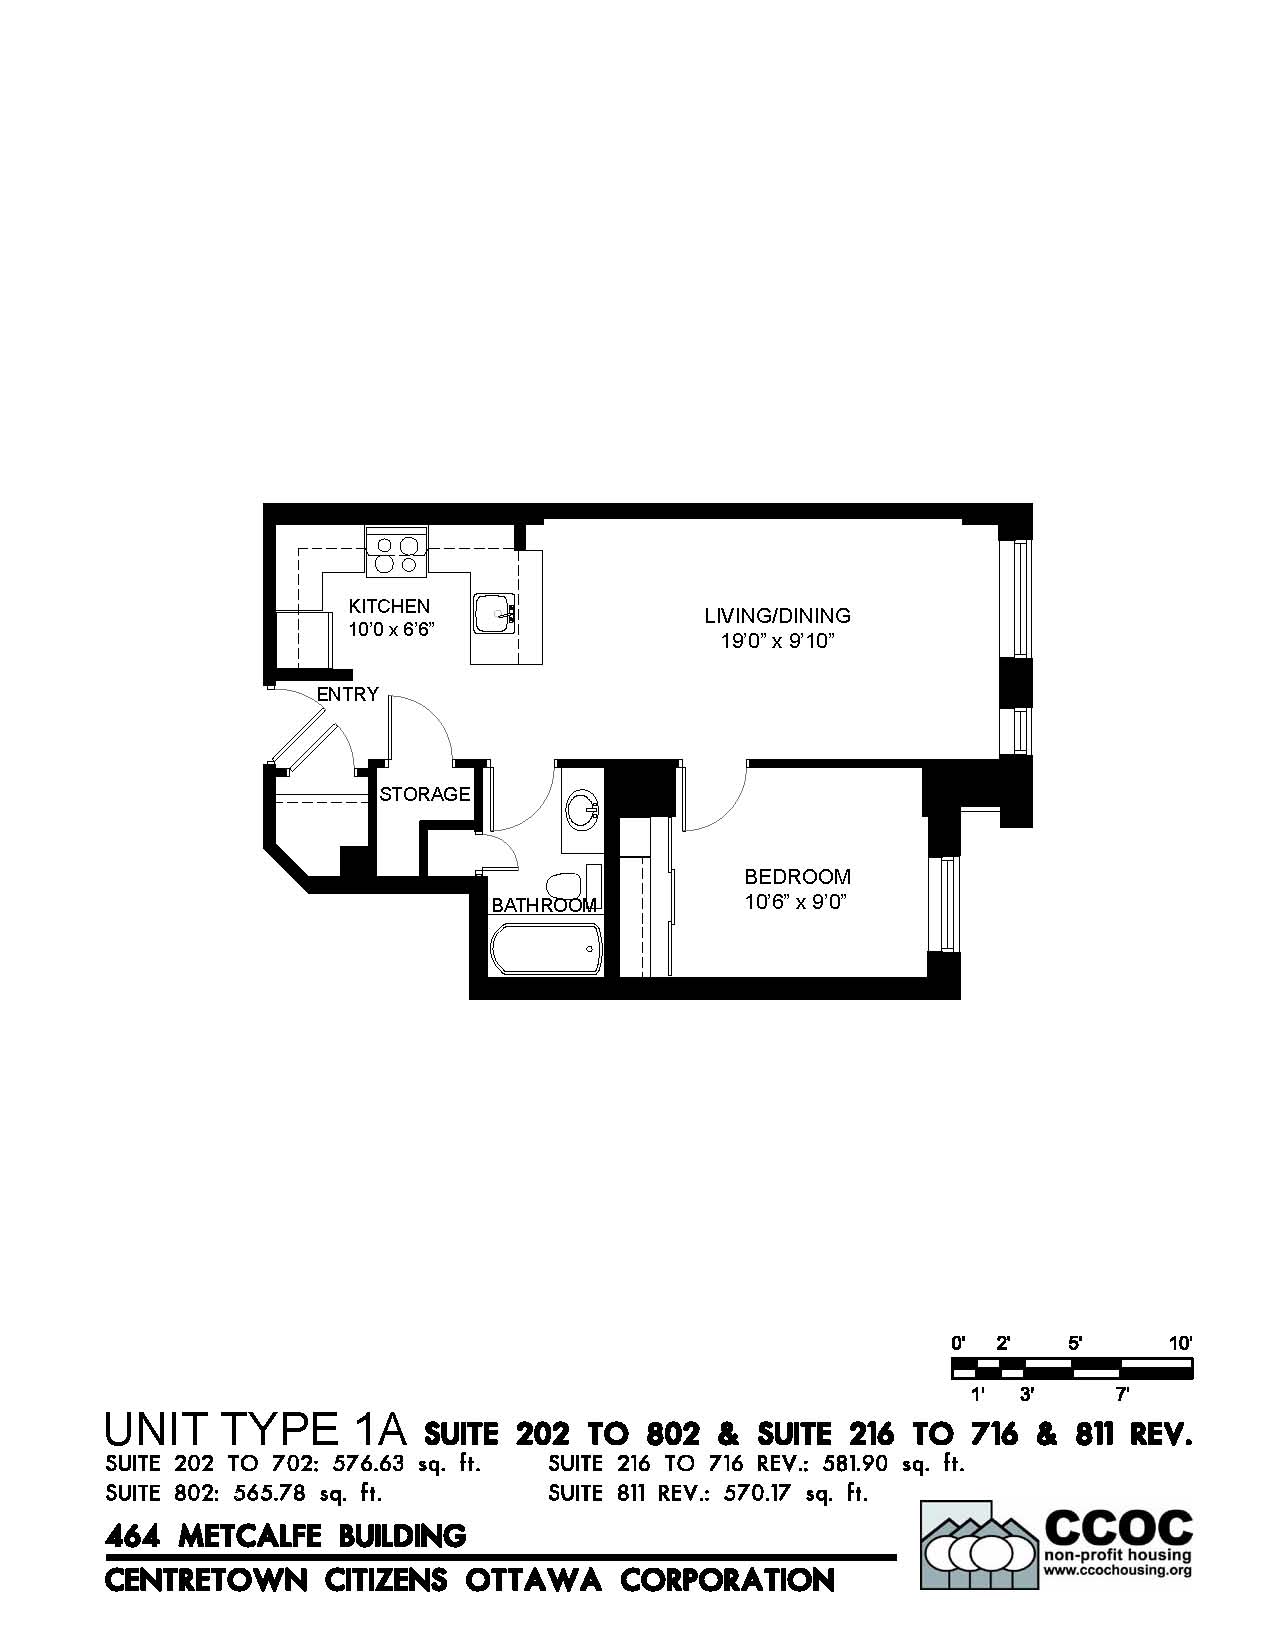 This is an image of the apartment floorplan. Please scroll down for plain-text dimensions.